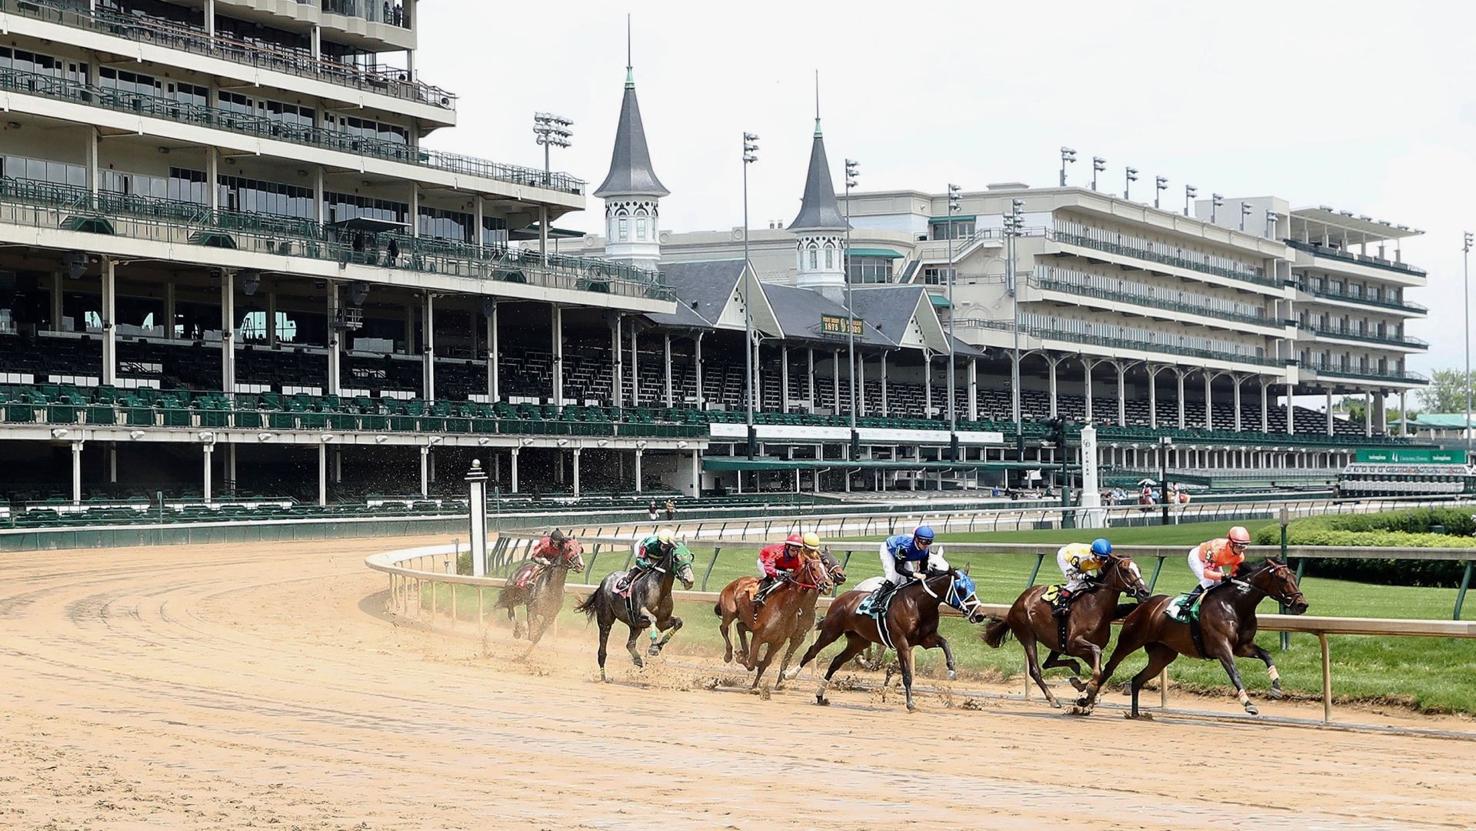 CRAWFORD | No fans in the stands, but Churchill Downs' opening saw huge wagering increase 